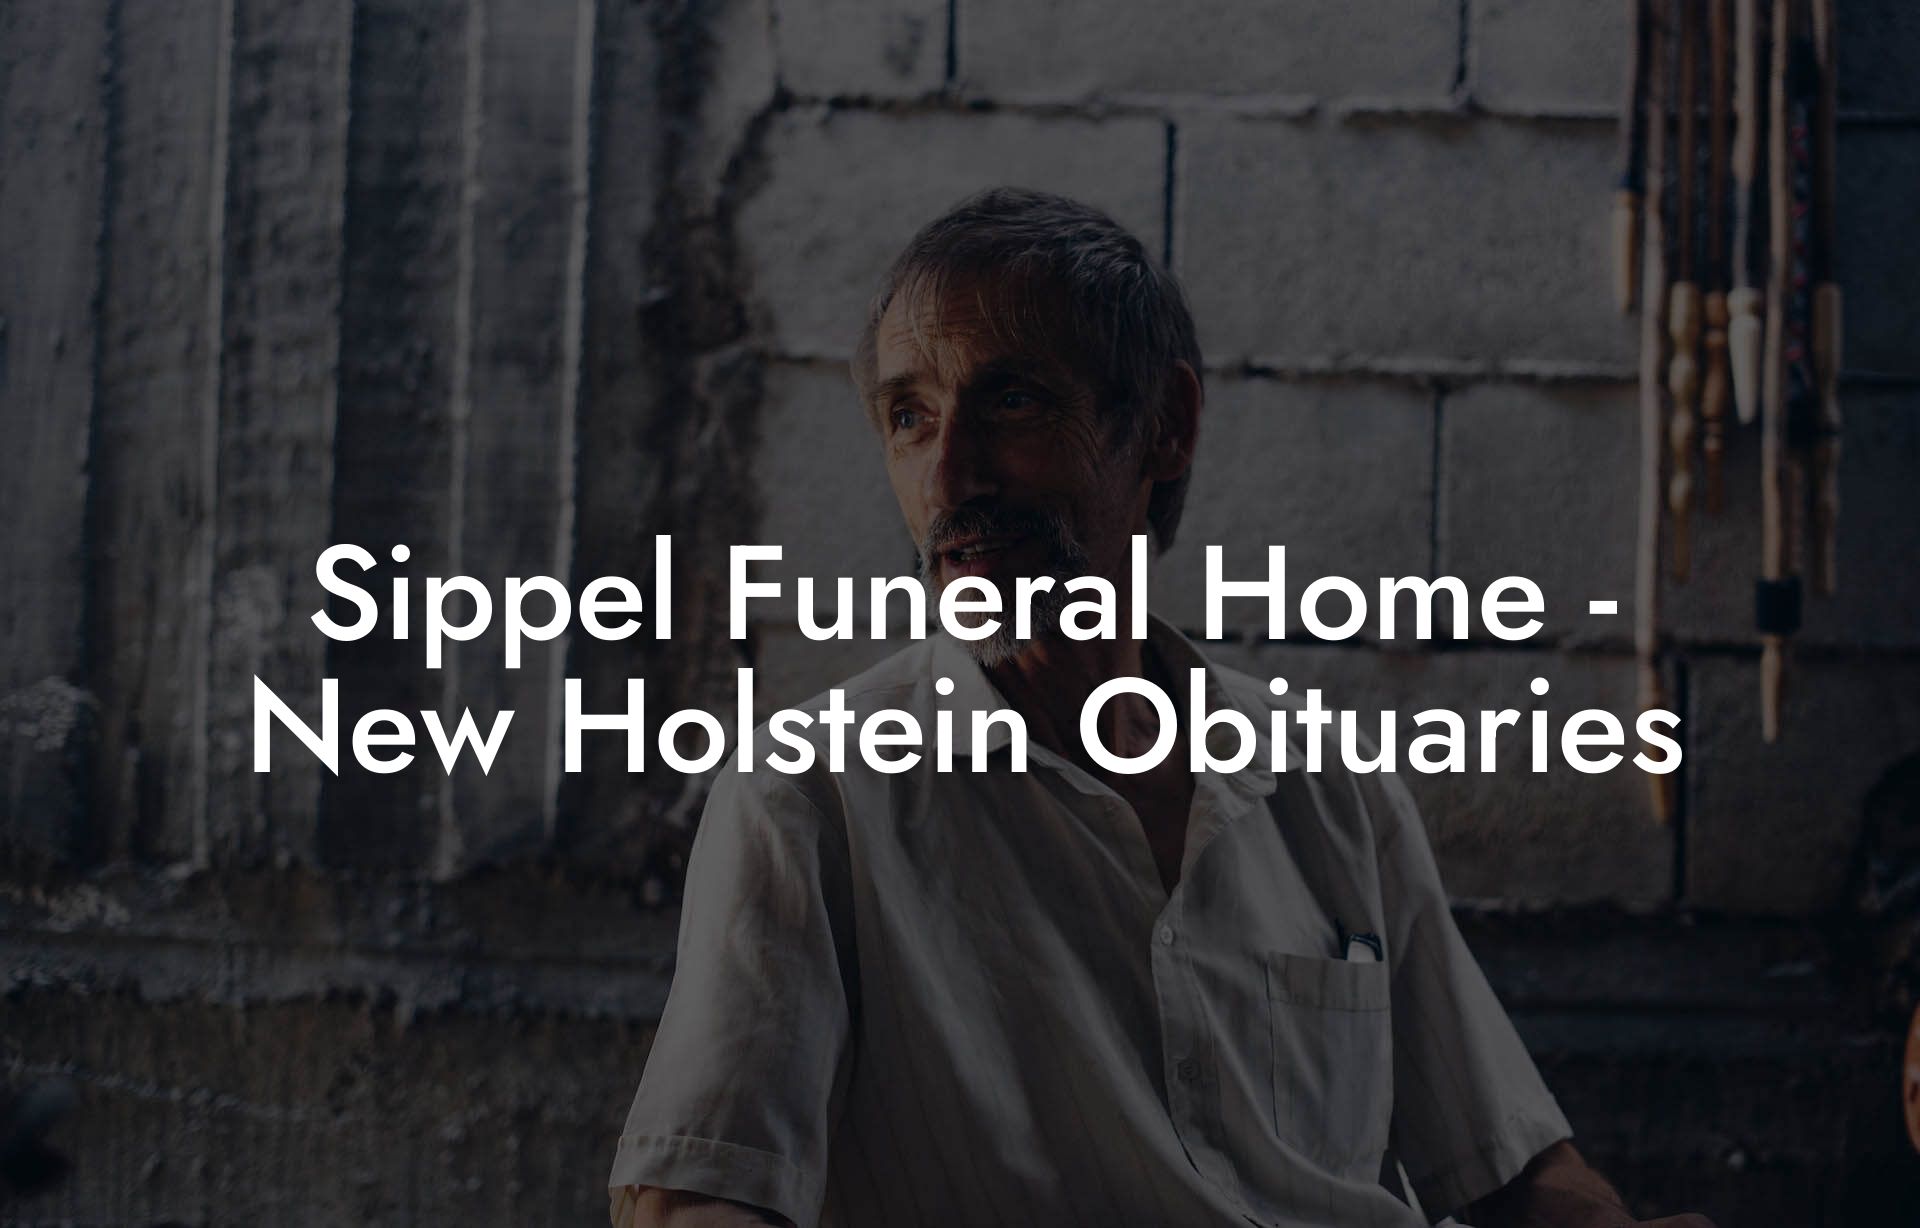 Sippel Funeral Home - New Holstein Obituaries